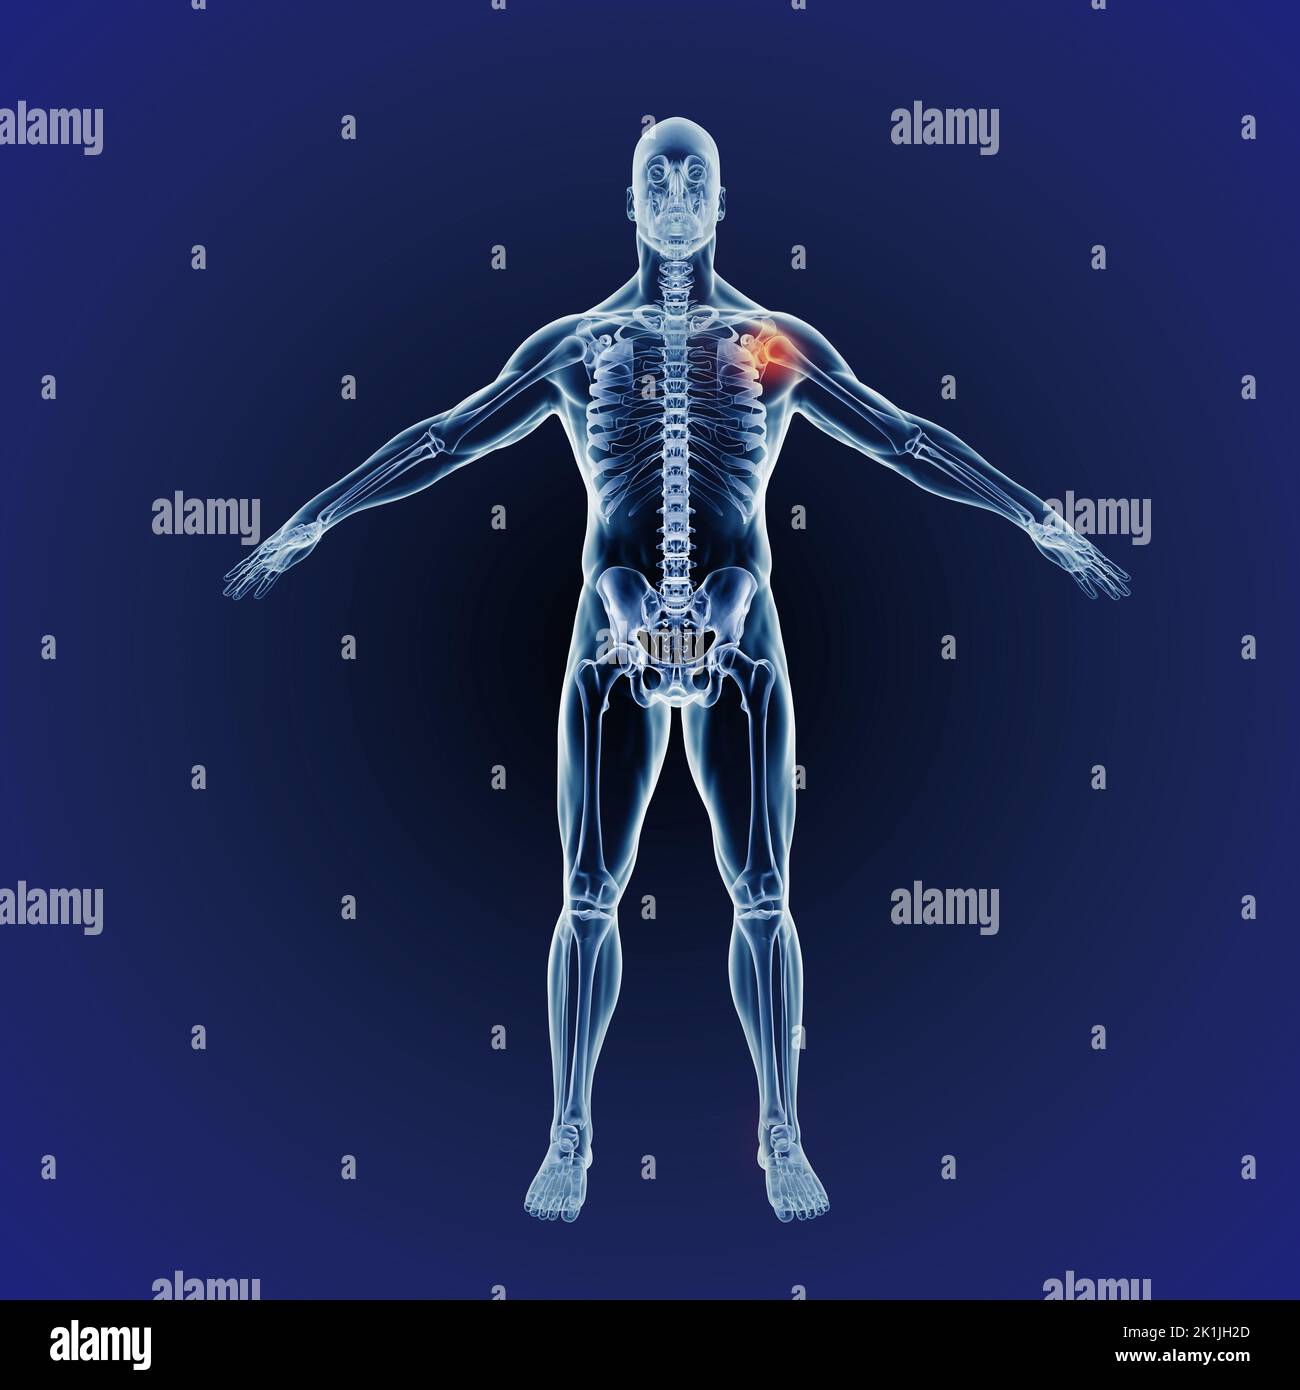 Inflammation can strike anywhere. A full length cgi representation of the human body indicating the skeletal structure. Stock Photo